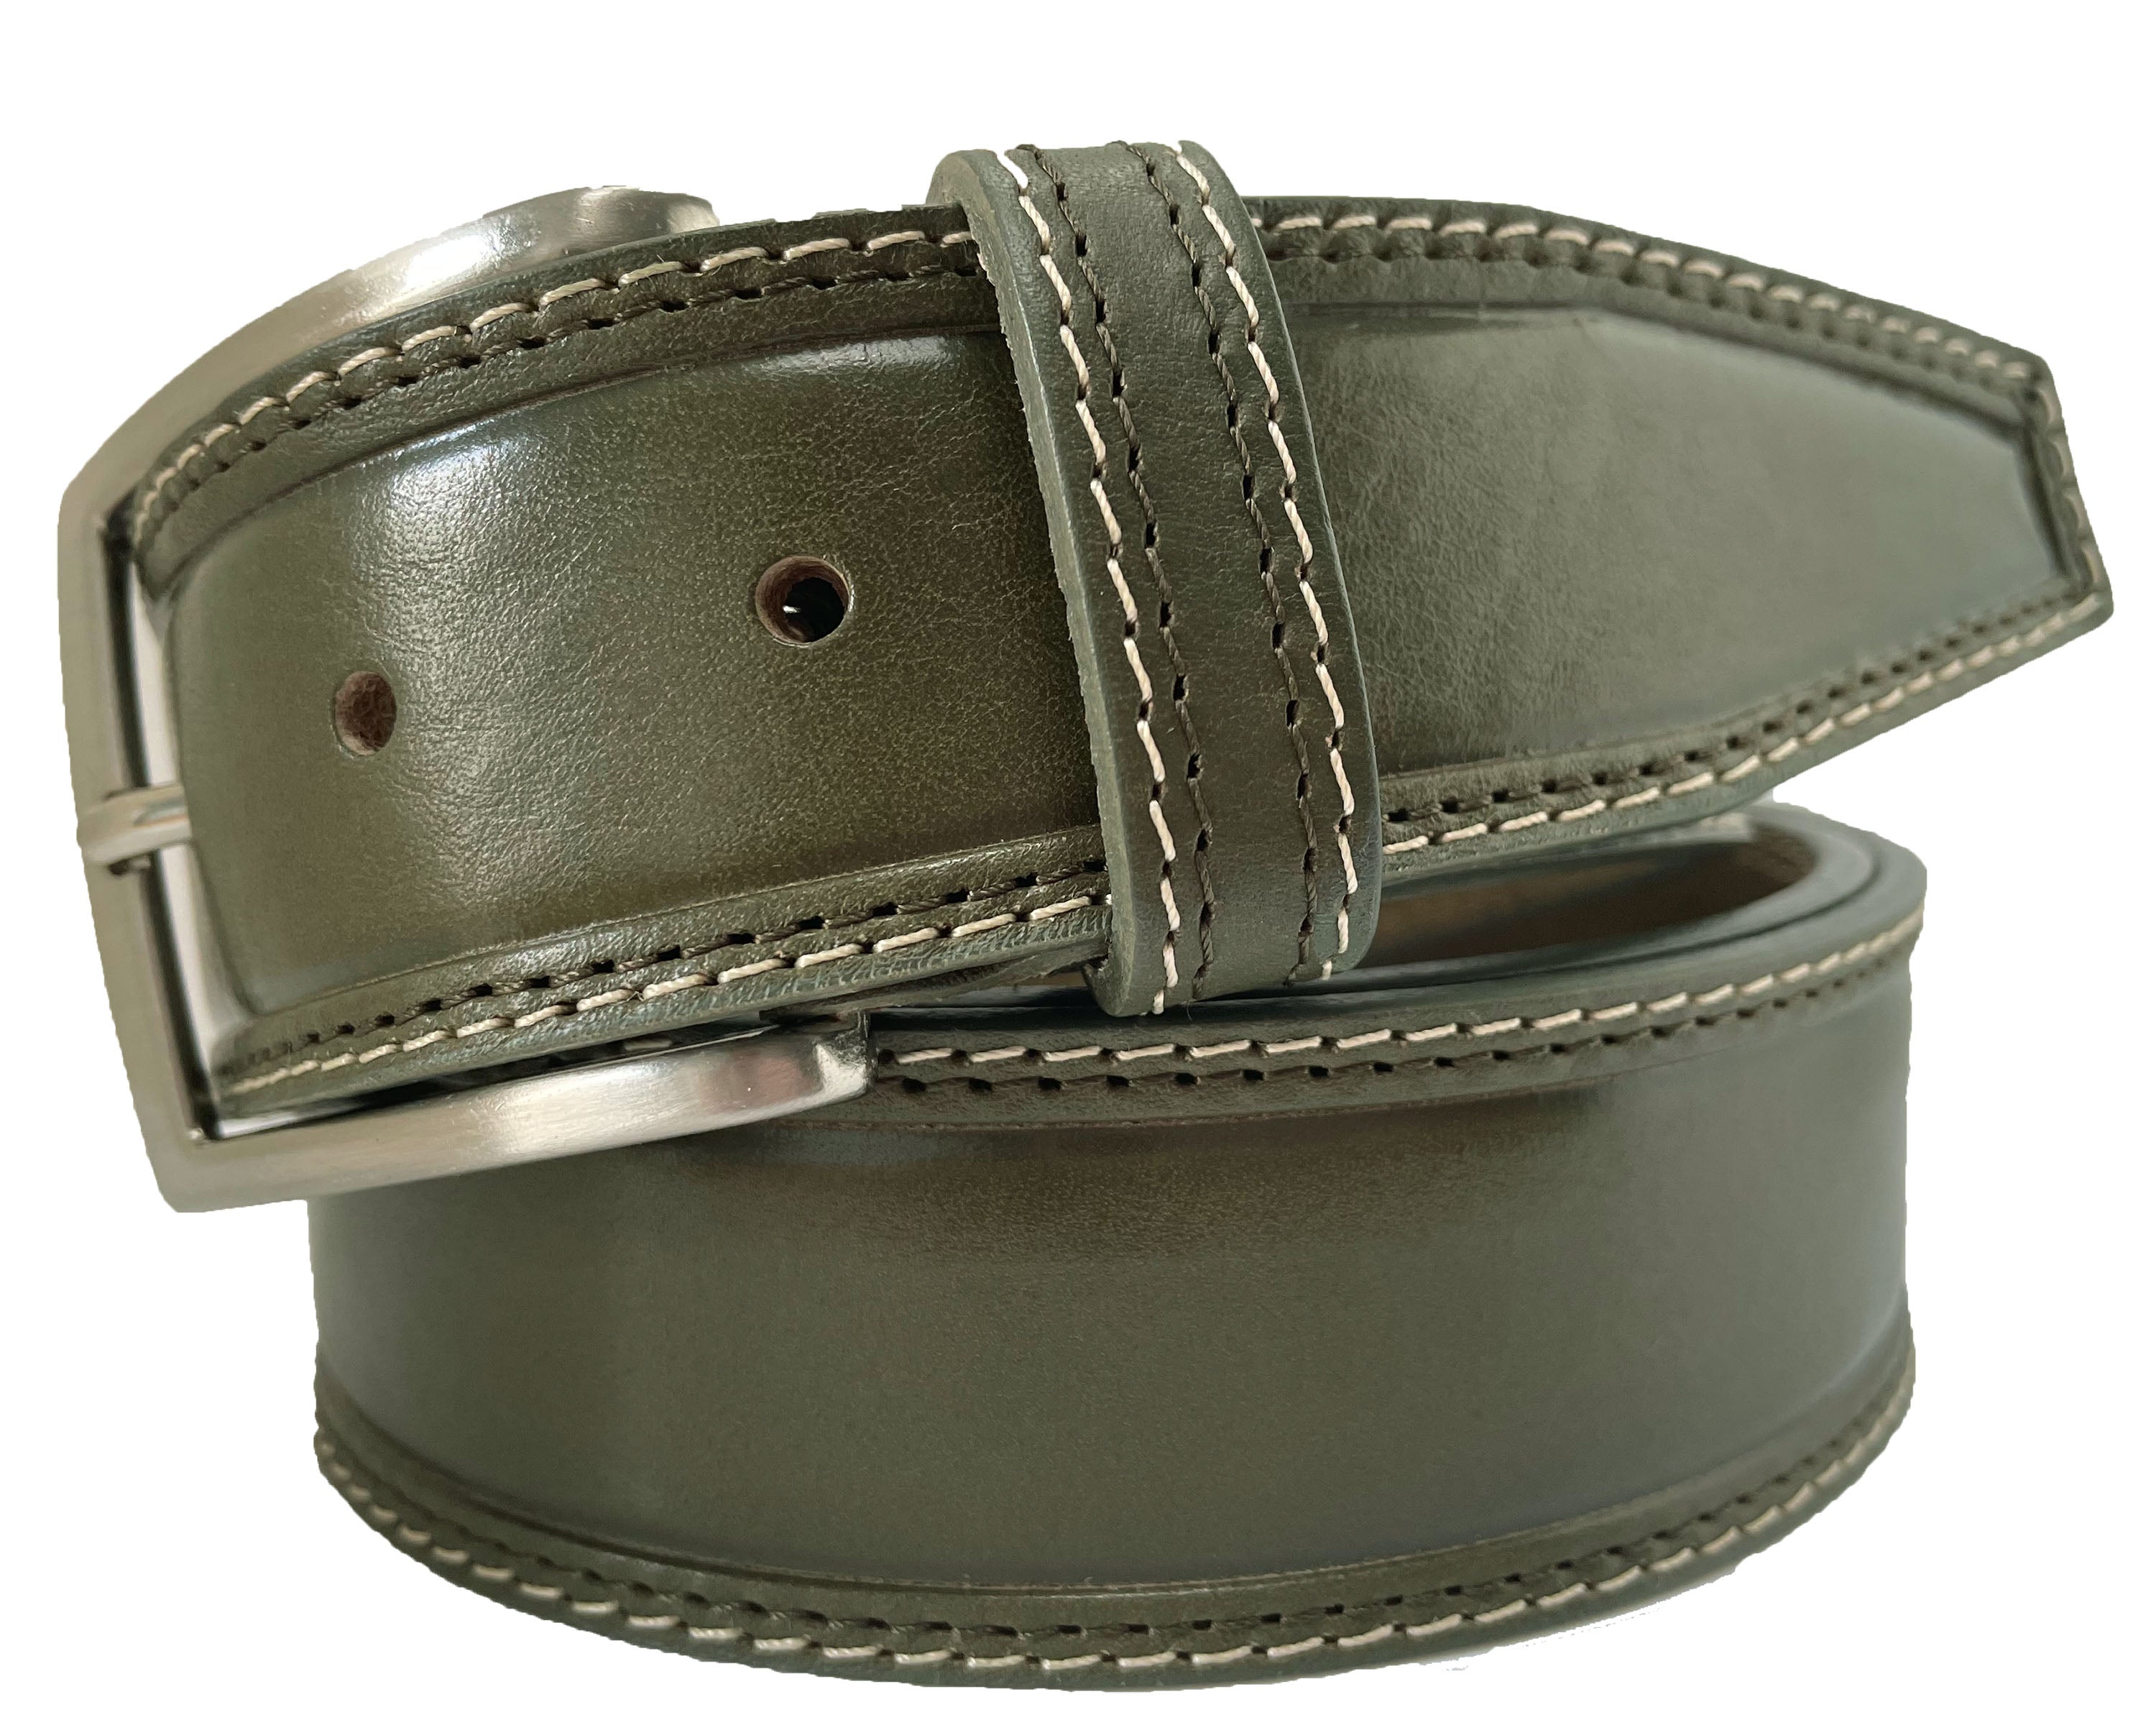 MILITARY GREEN DOUBLE STITCHED LEATHER BELT